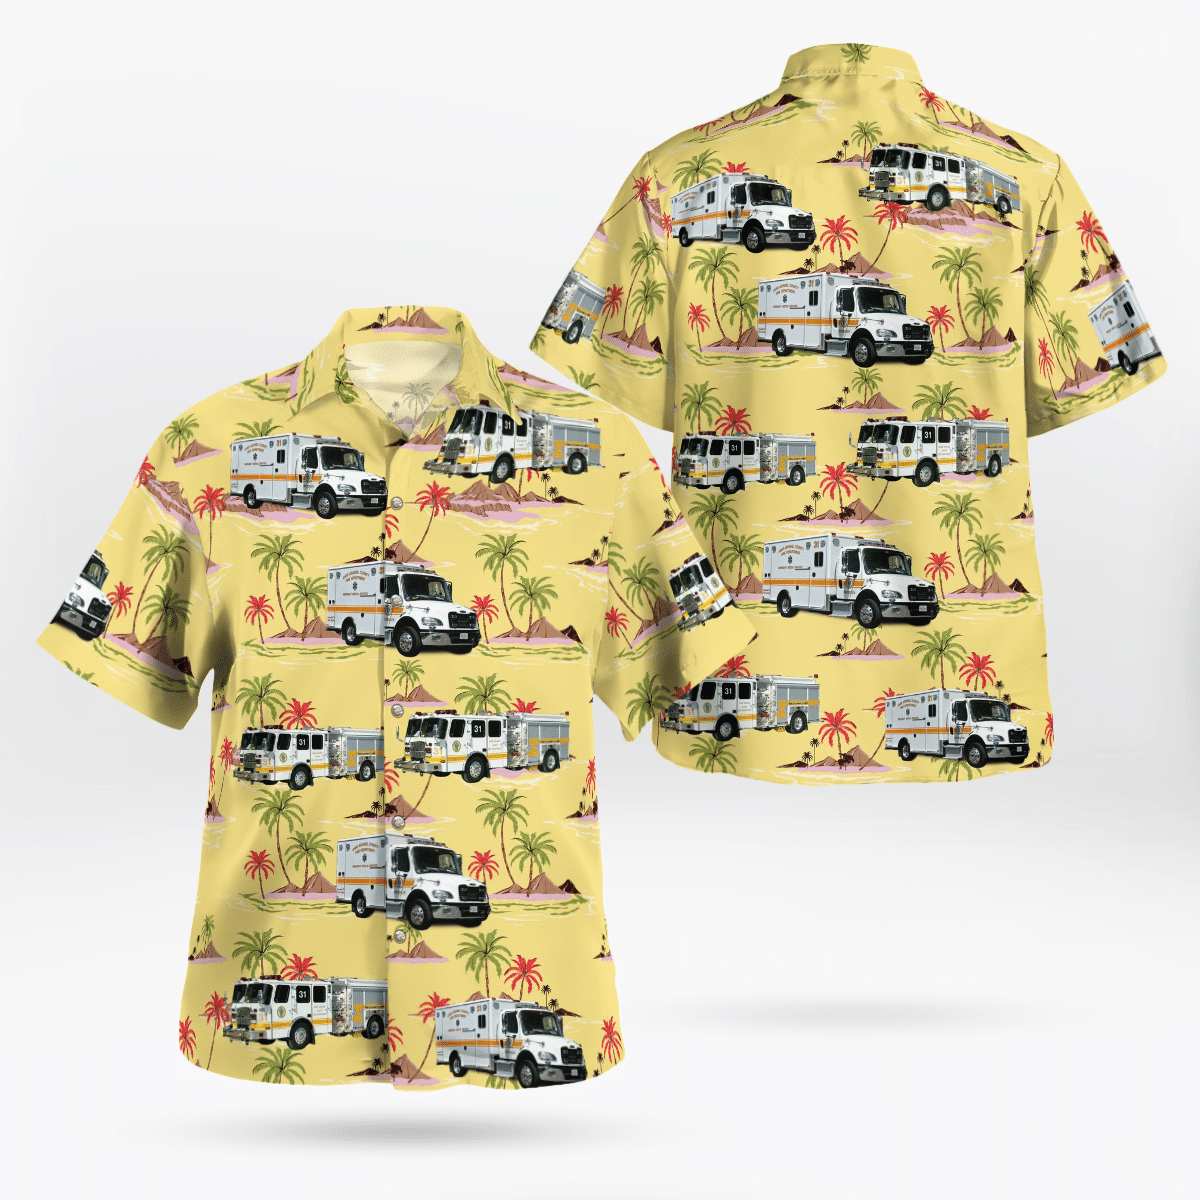 Shop now to find the perfect Hawaii Shirt for your hobby 24